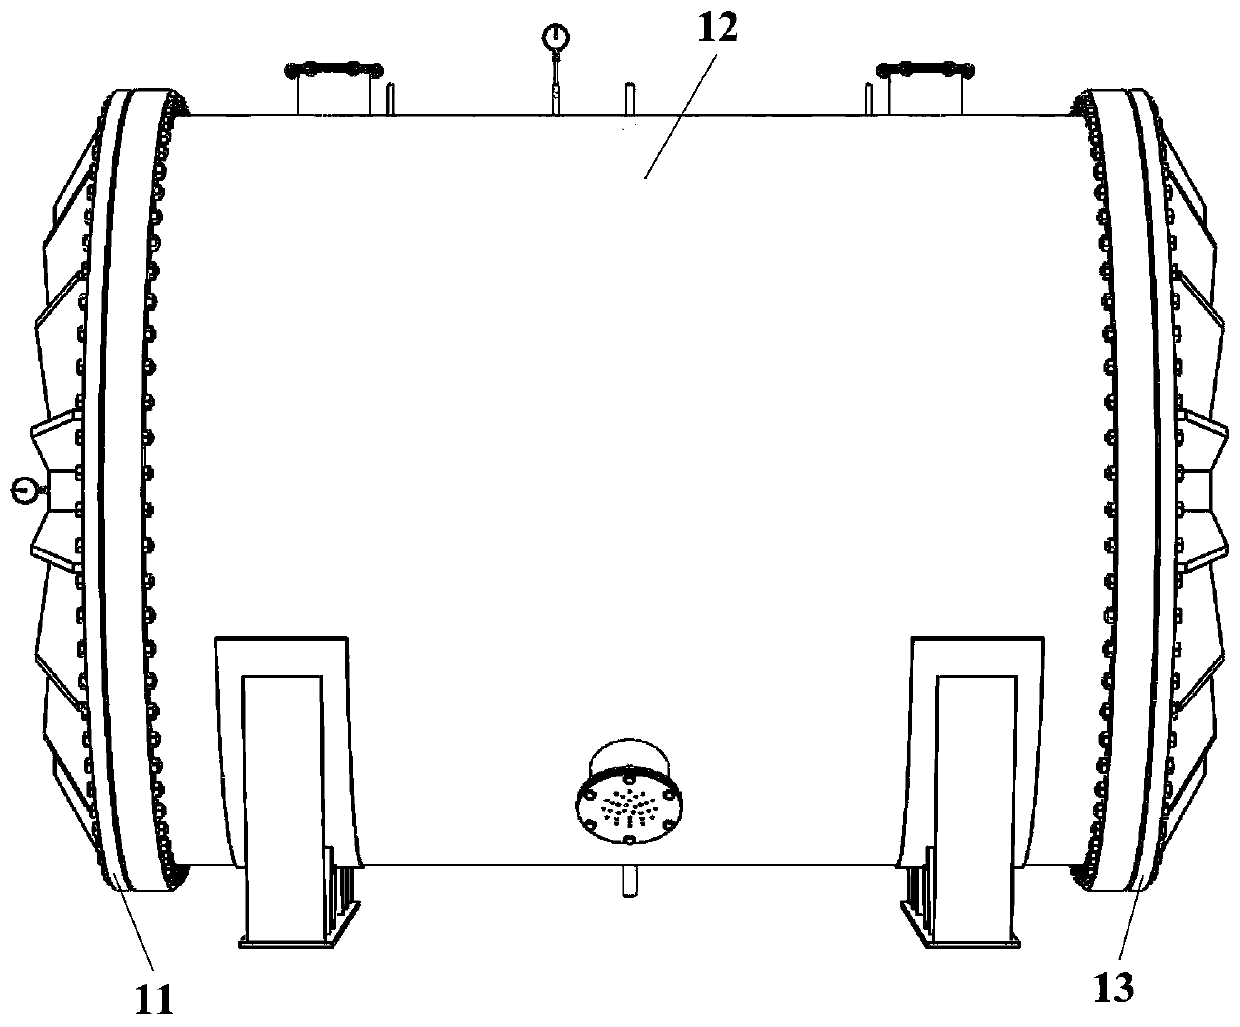 Tunnel lining structure model test device and test method